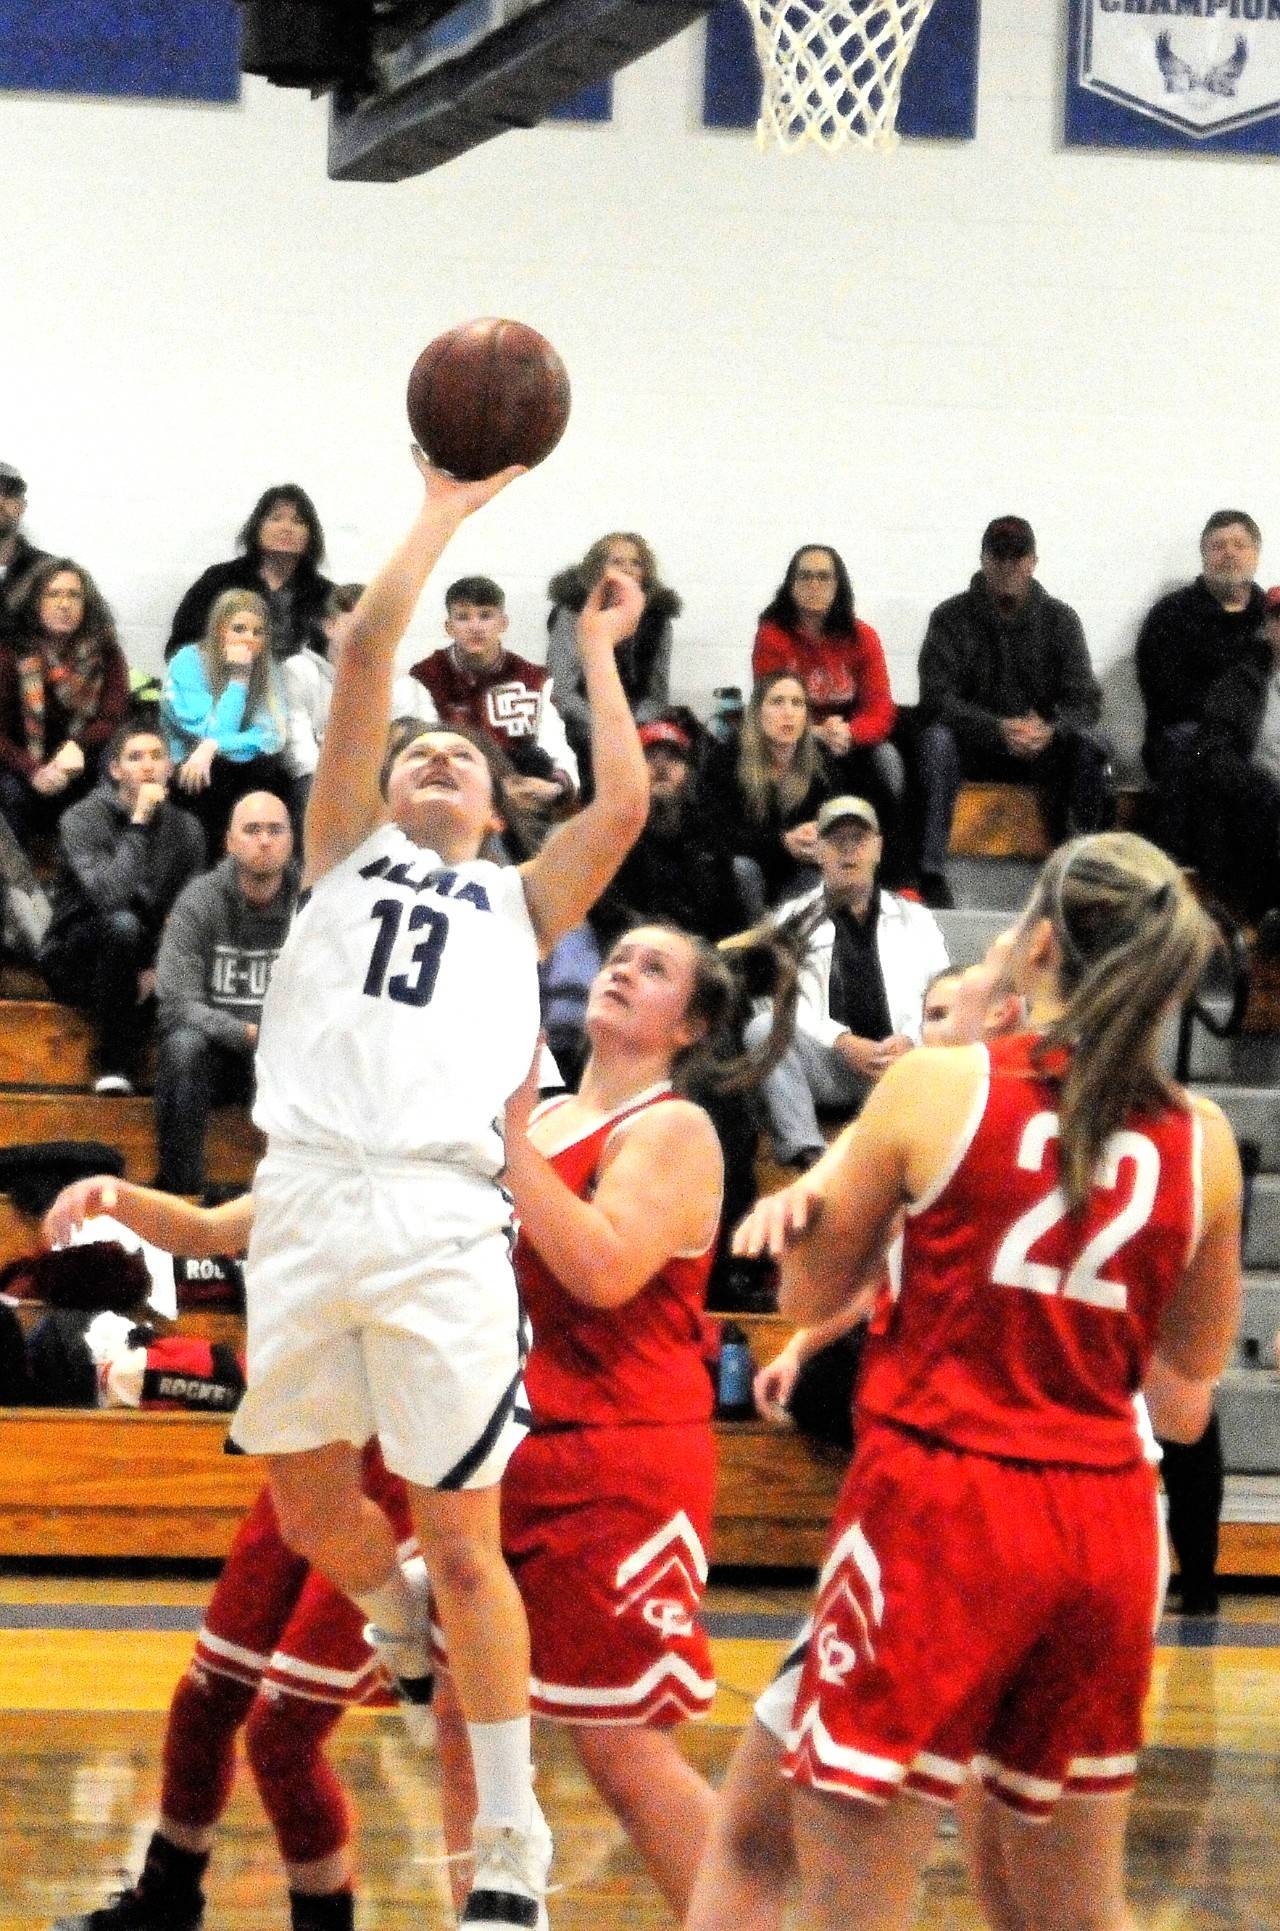 Kali Rambo hits a close-range shot in the first quarter against Castle Rock. Rambo had seven points in Elma’s 63-16 win in the opening round of the District IV tournament. (Hasani Grayson | Grays Harbor News Group)